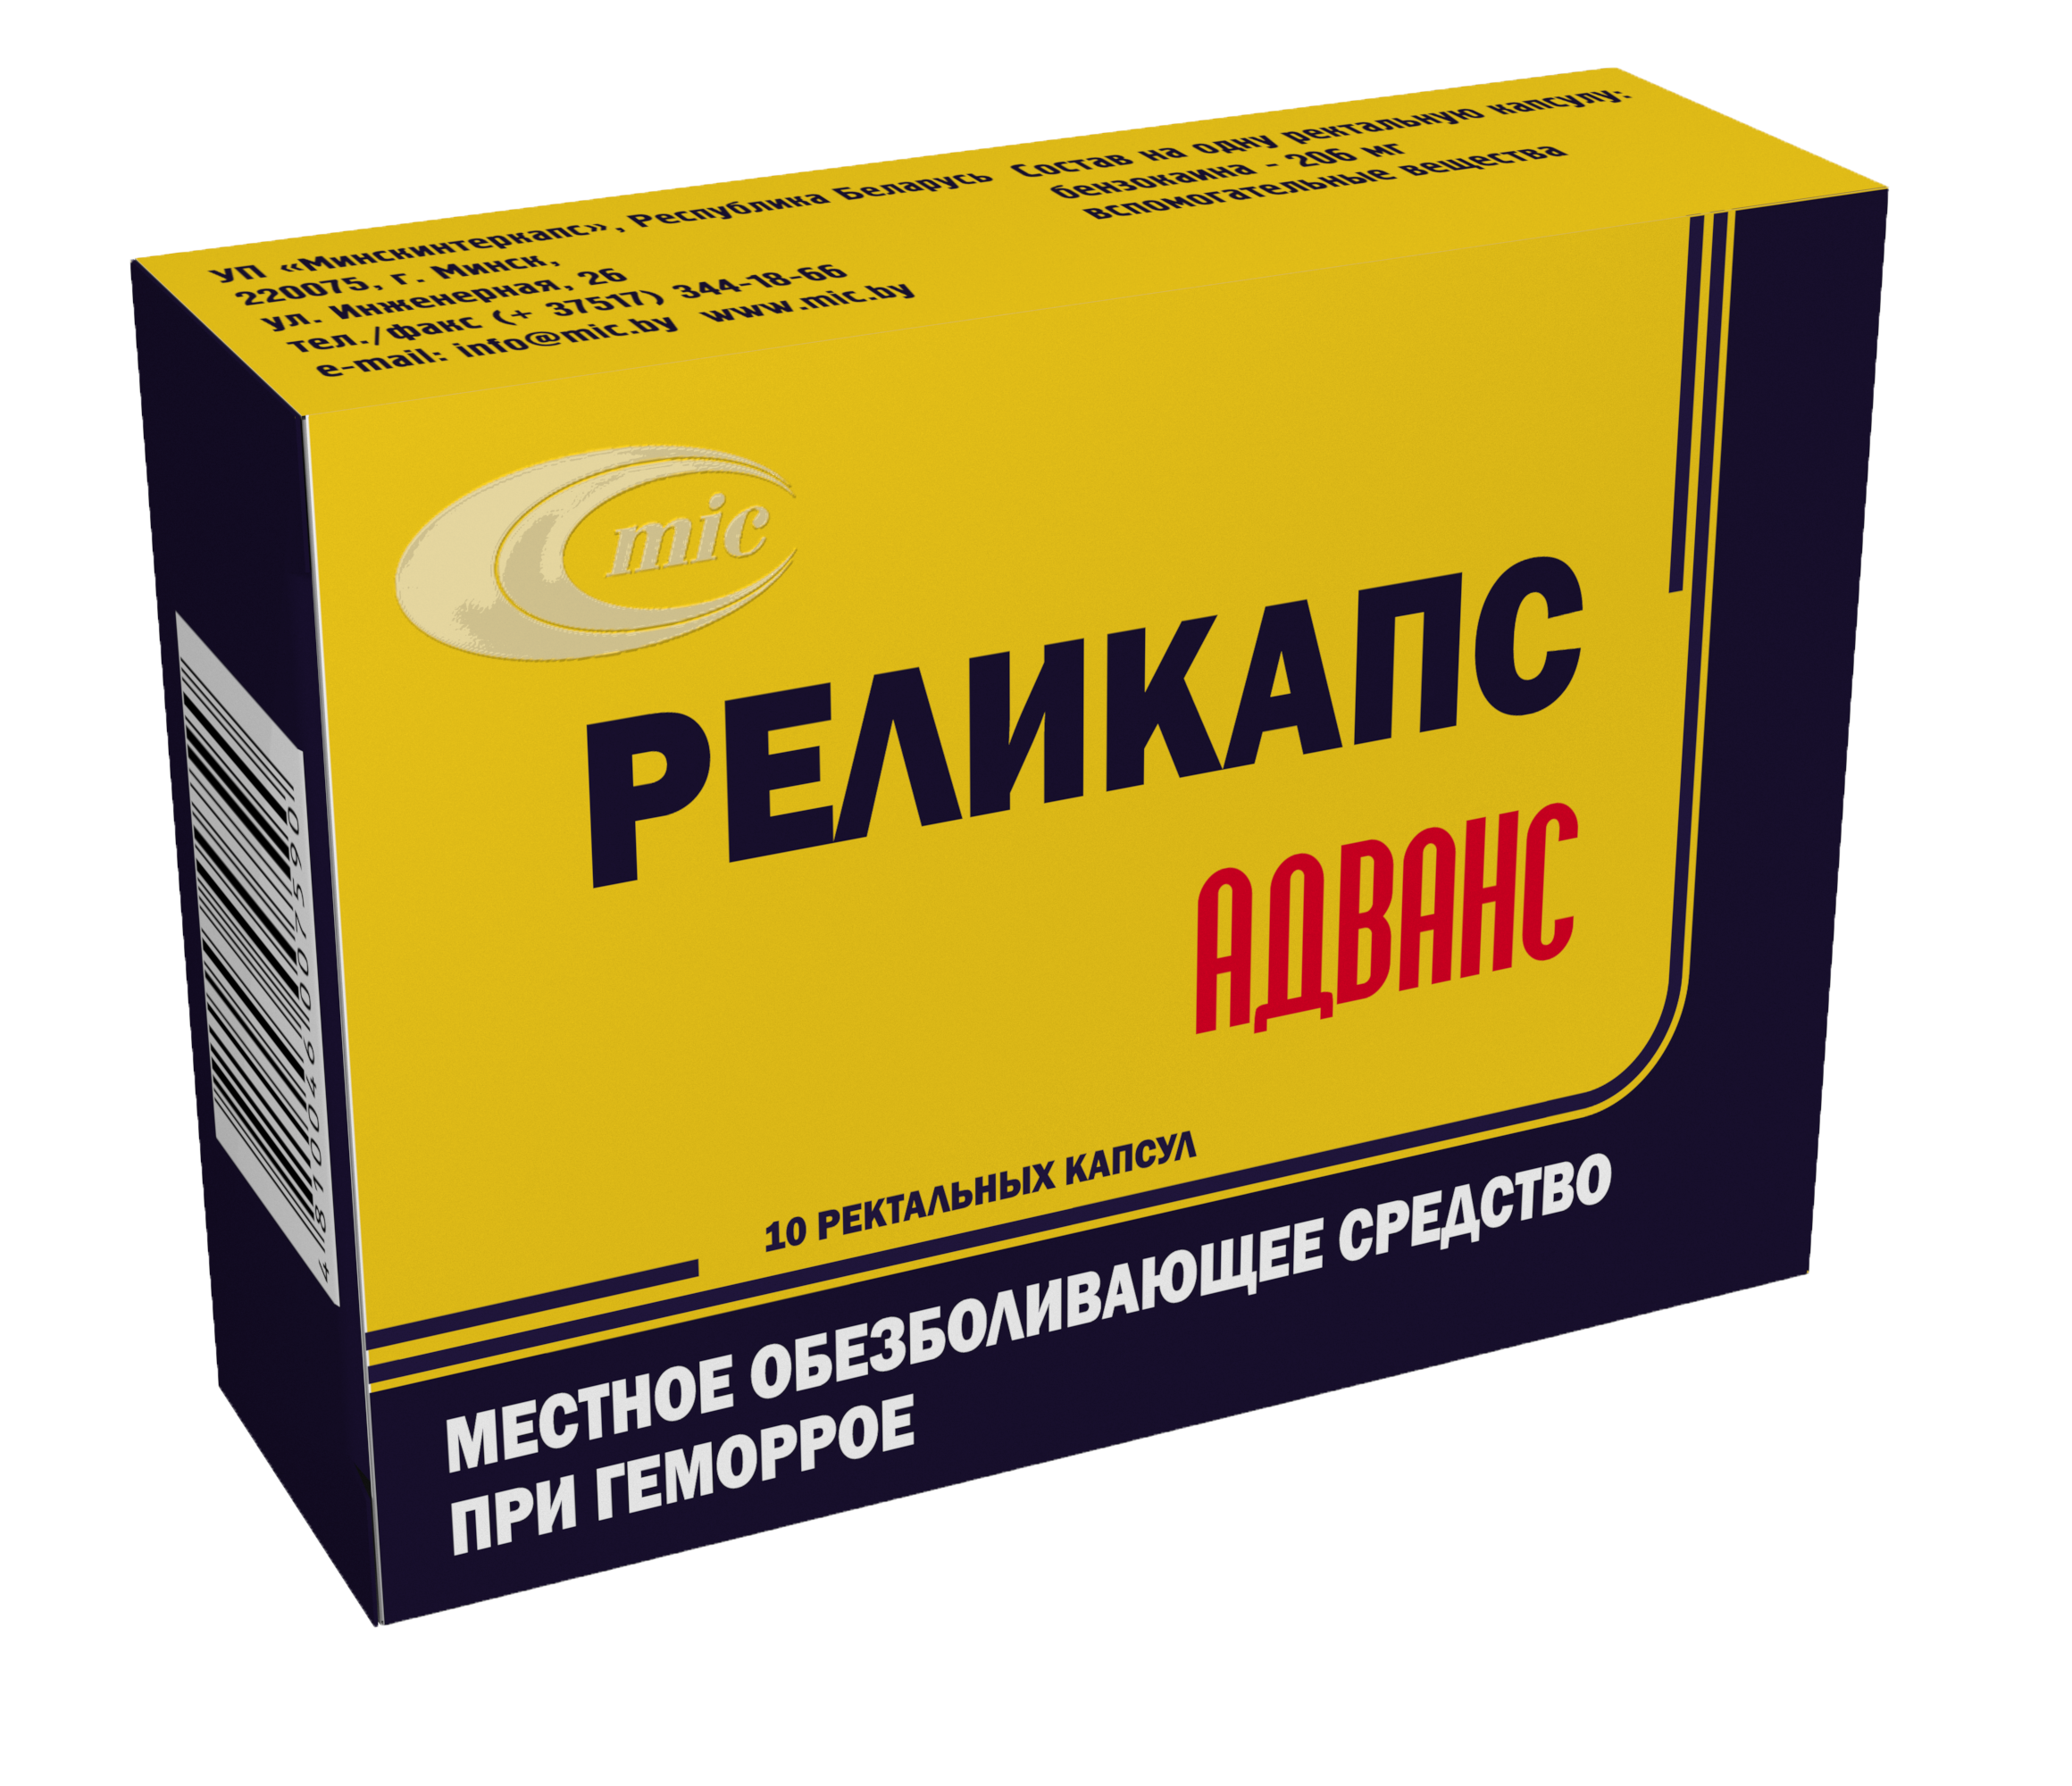 The Unitary Enterprise “Minskintercaps” launched the production and sell of a new drug “RELICAPS ADVANCE”